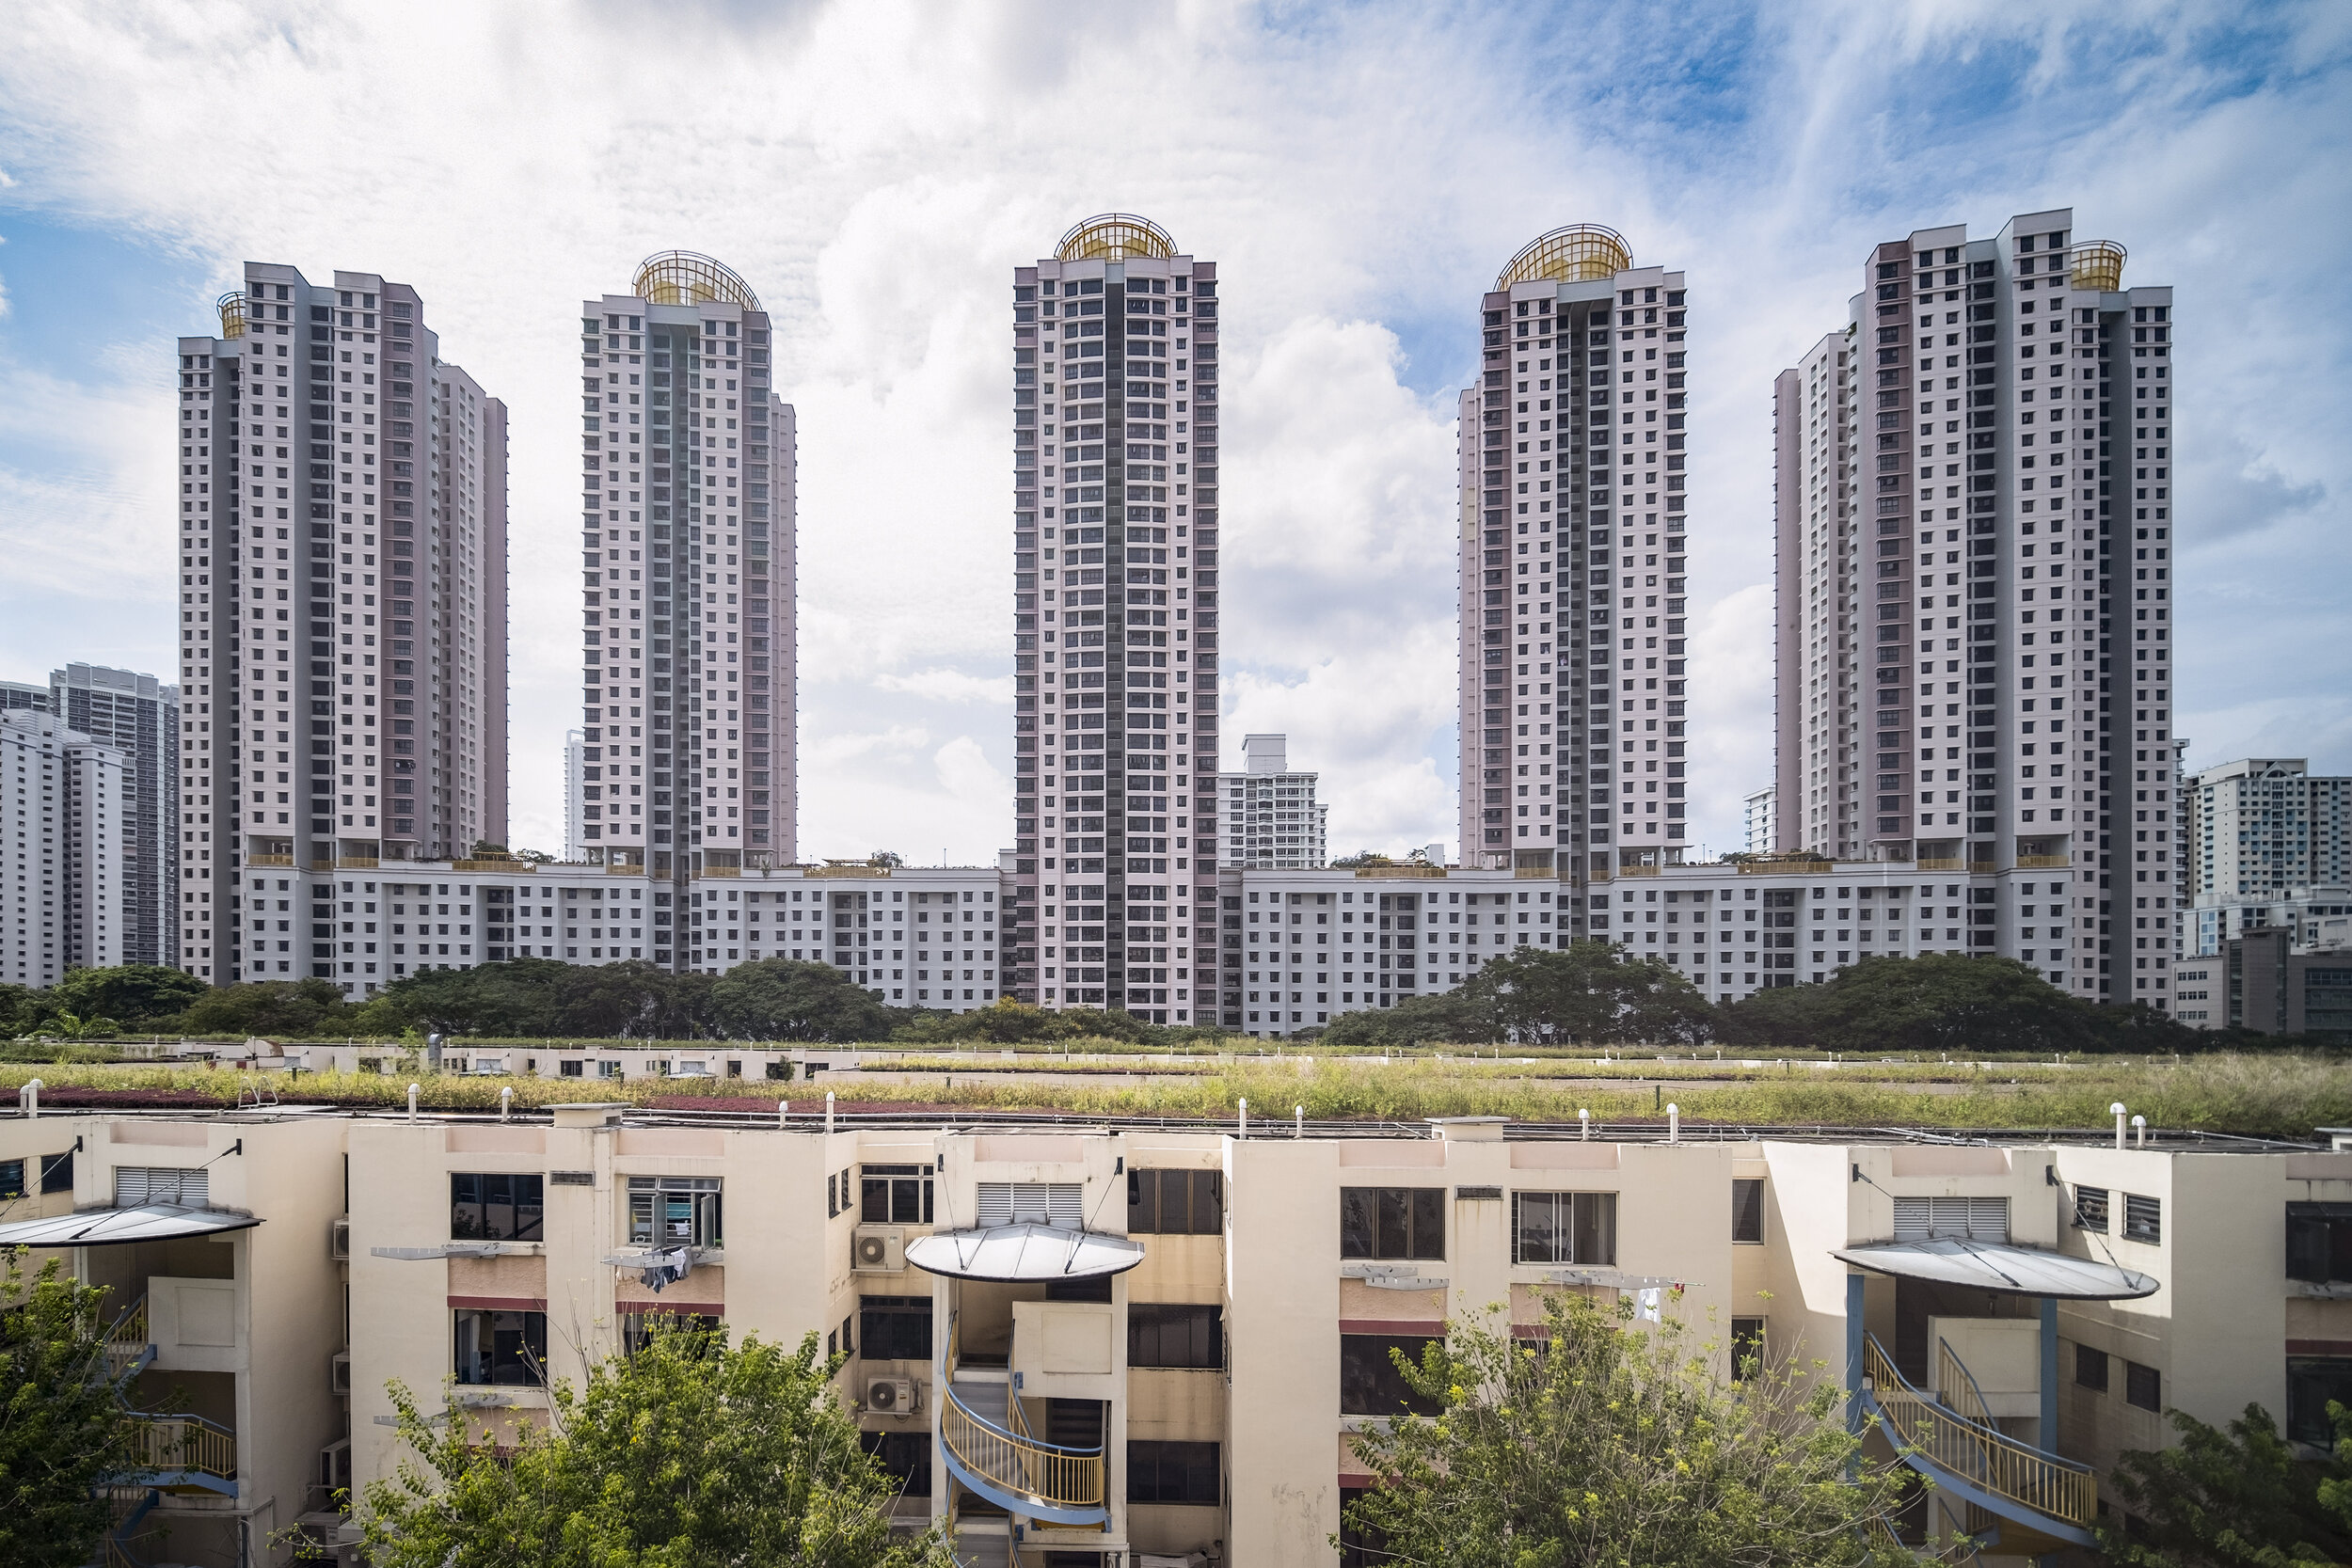  Public housing flats are seen in the satellite town of Toa Payoh in central Singapore 